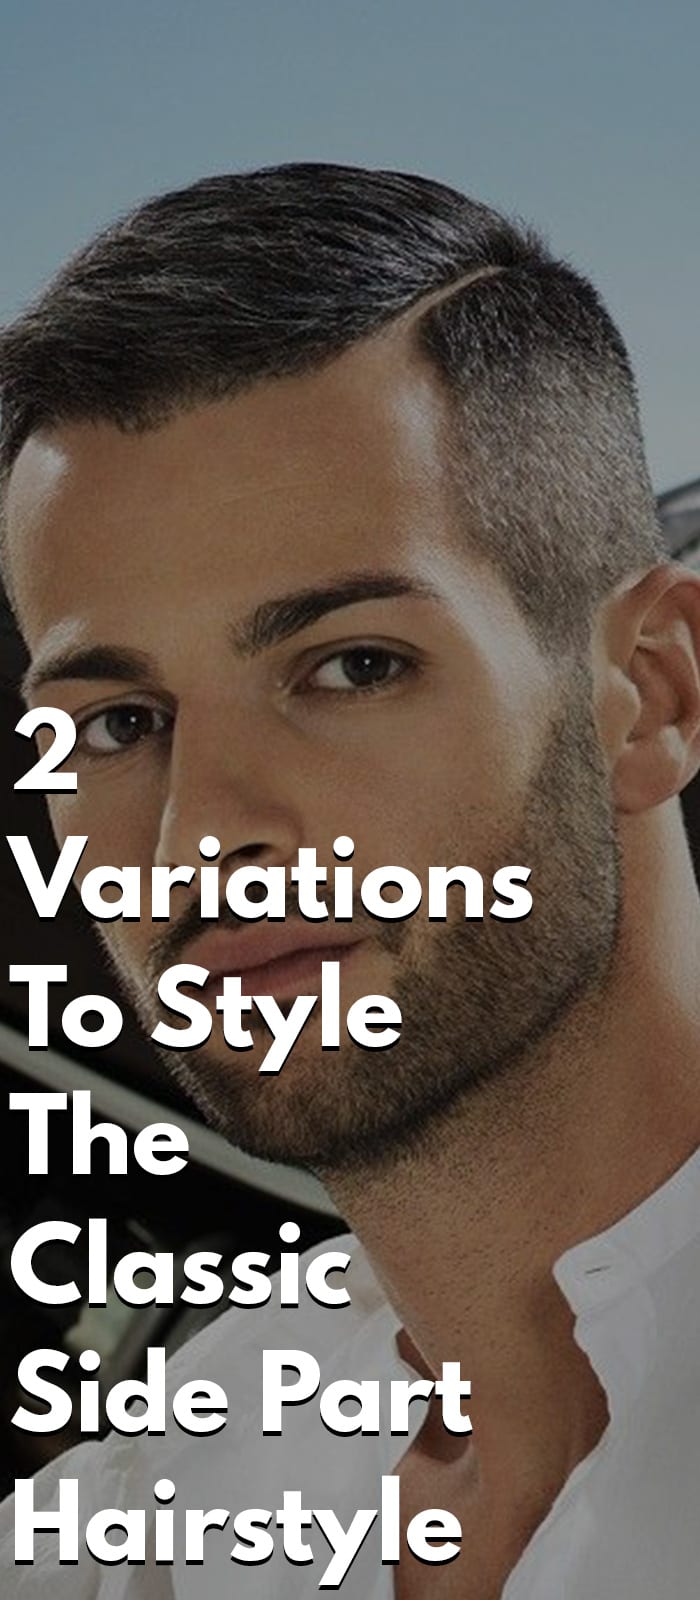 2 Variations To Style The Classic Side Part Hairstyle